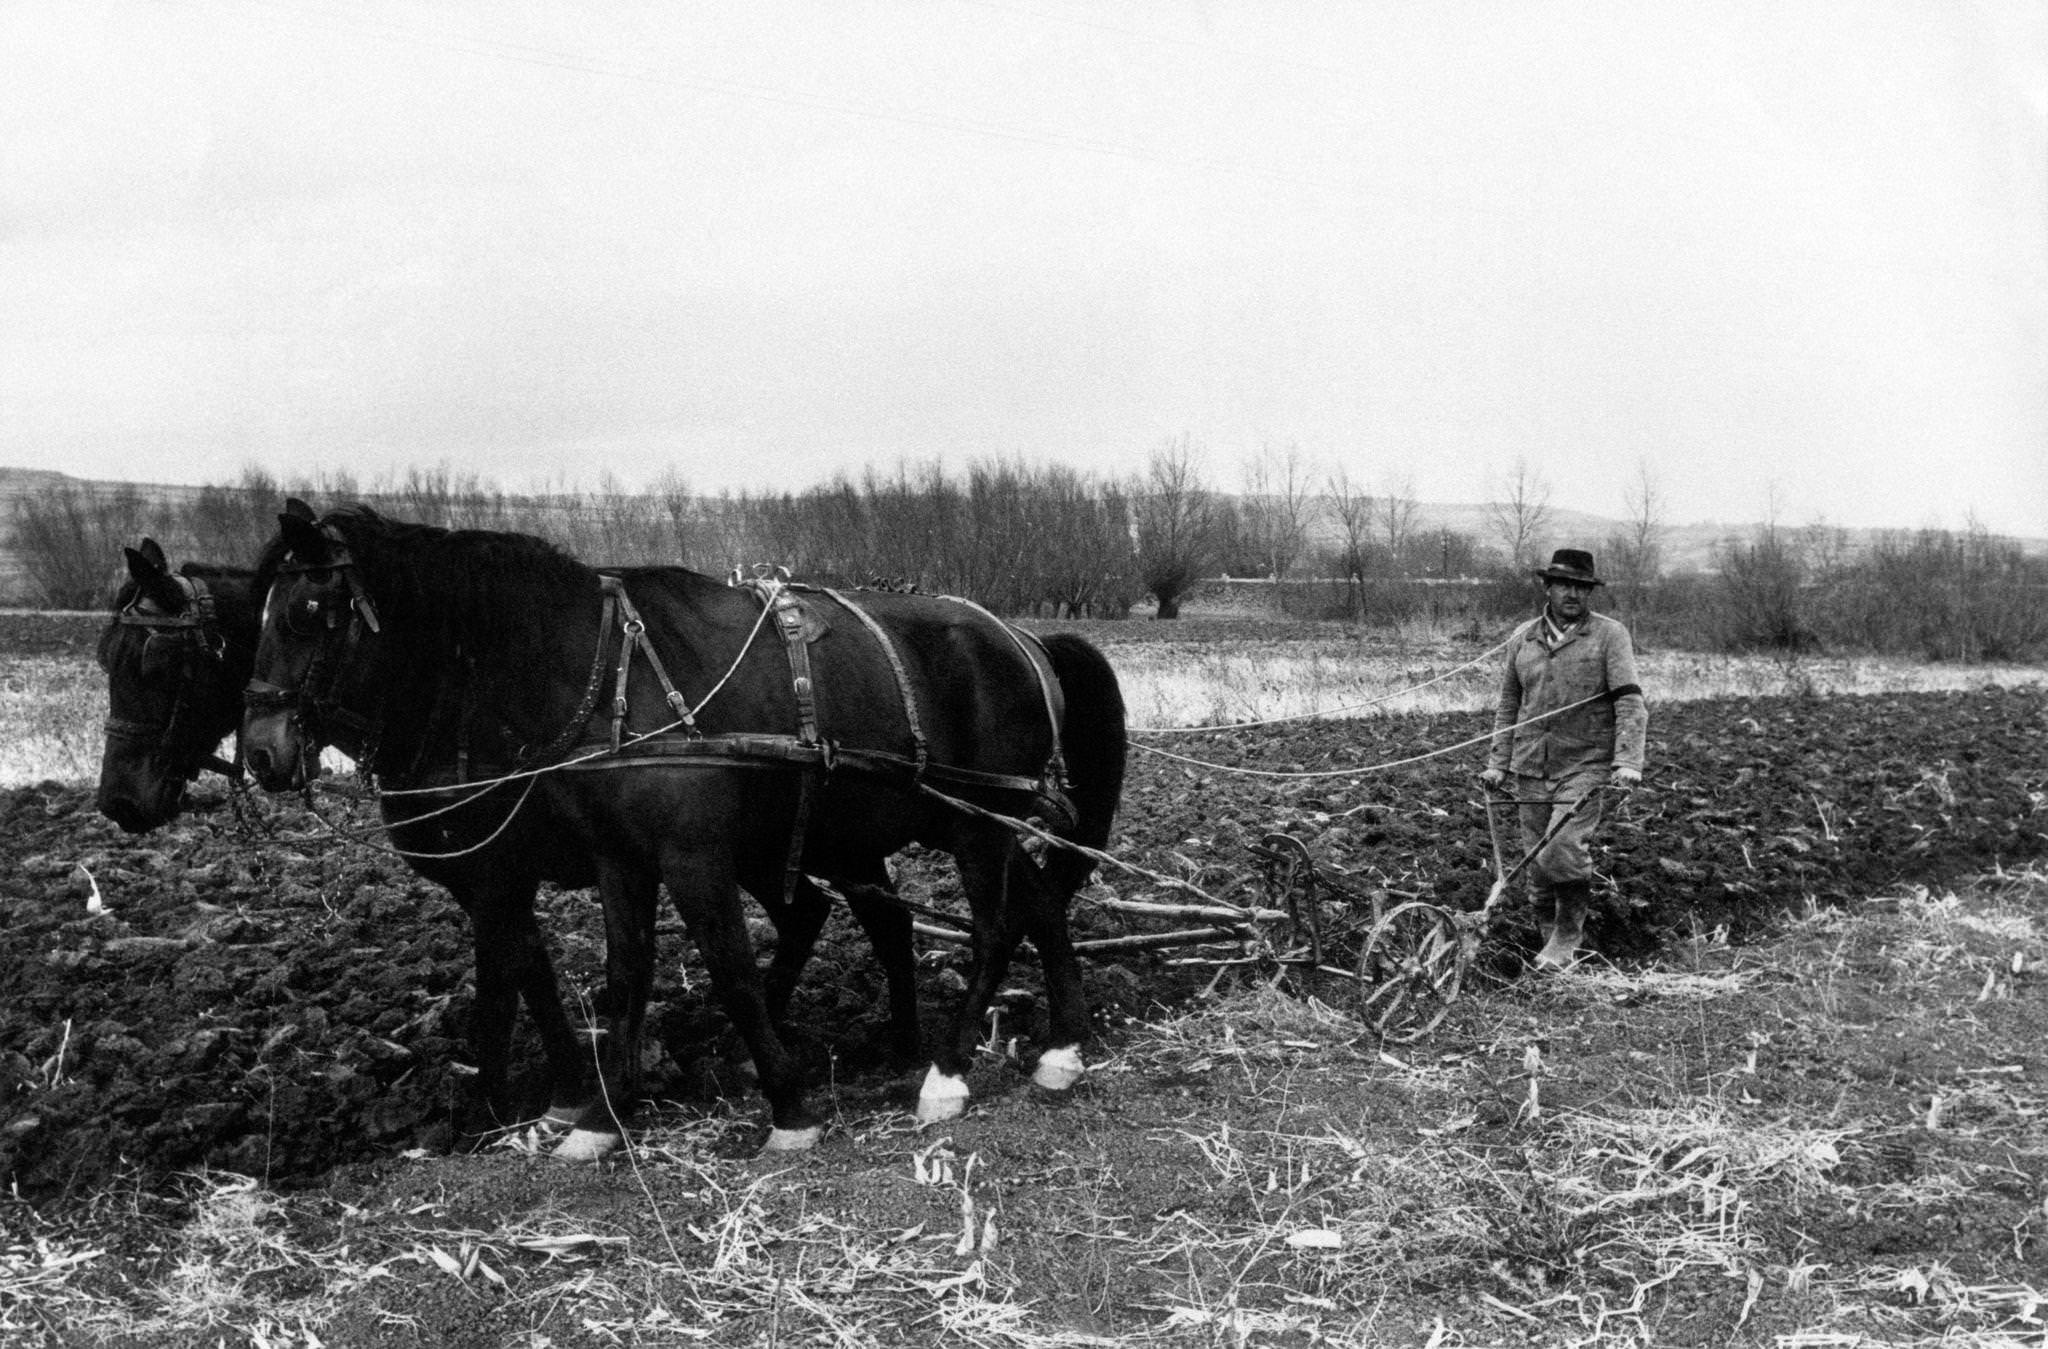 A farmer ploughs a field with a ploughshare dragged by two horses, 20 km far from the capital city of Belgrade, Serbia, 1965